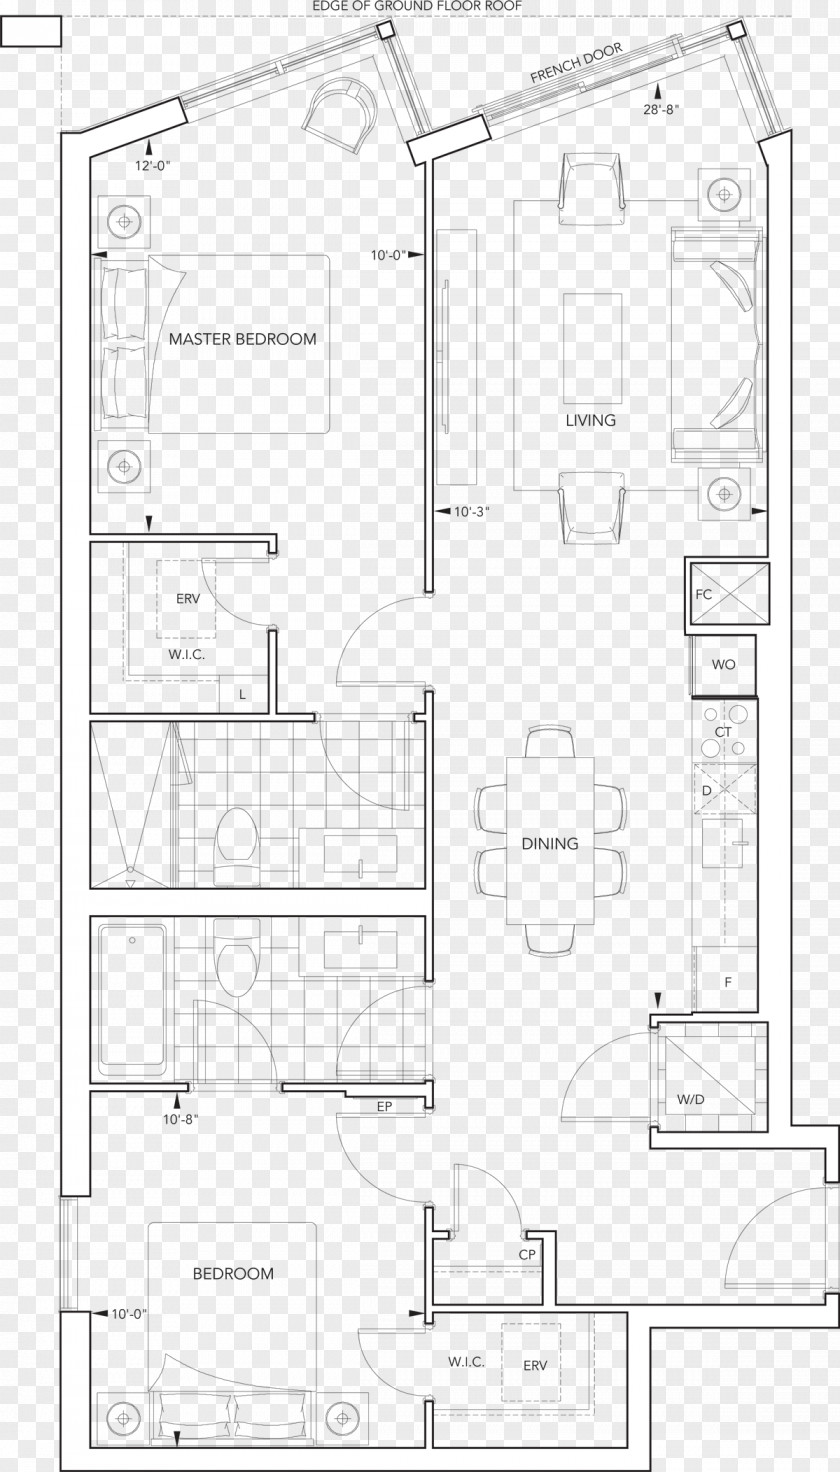 Design Floor Plan Architecture Technical Drawing PNG